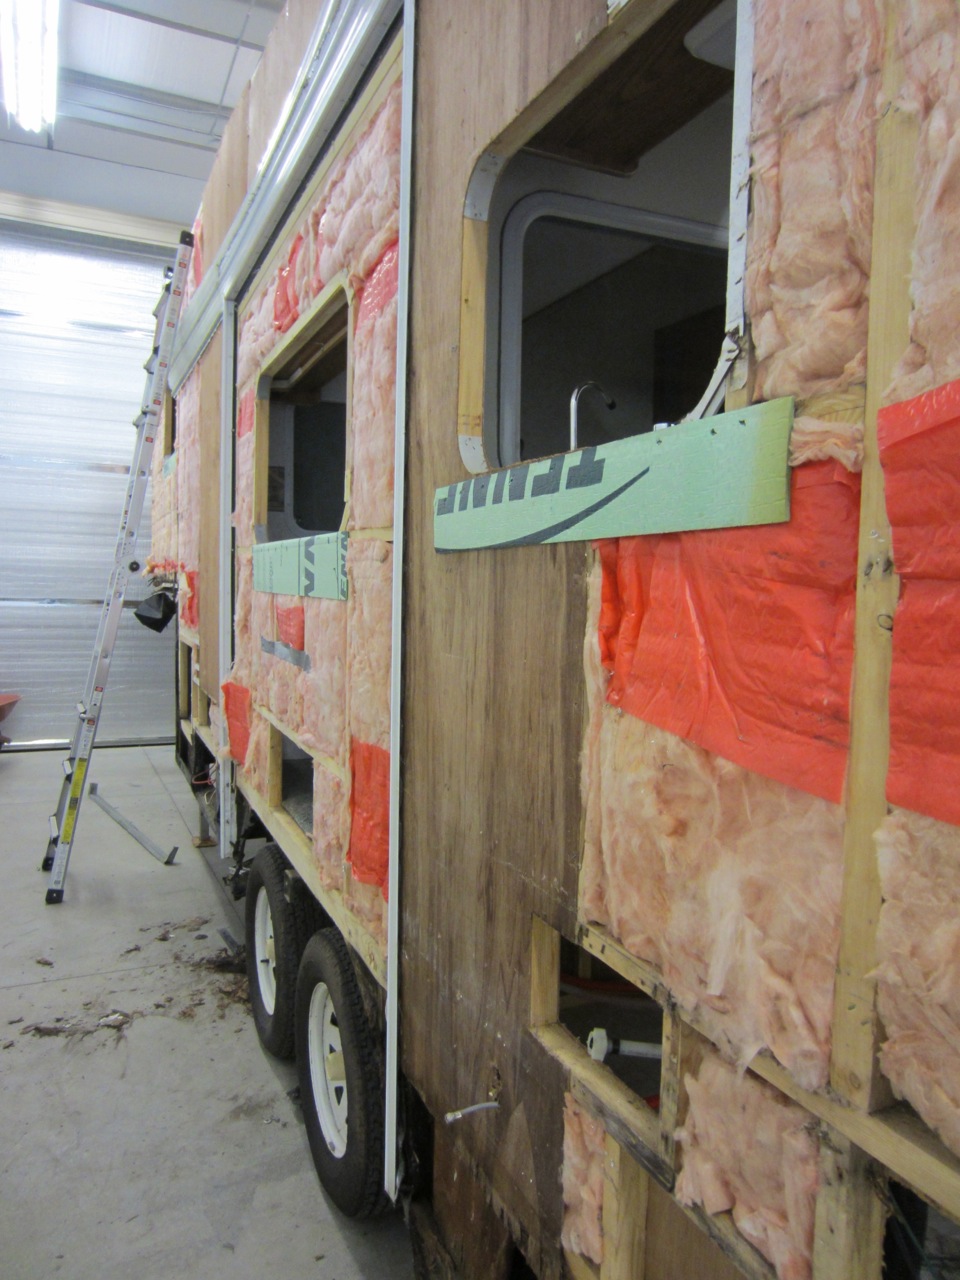  The original plan was the reuse the siding that we removed from the RV. But halfway through the teardown we realized that it would be hard to reuse it. The pieces of siding were deformed when removed and they weren't in the greatest condition to sta